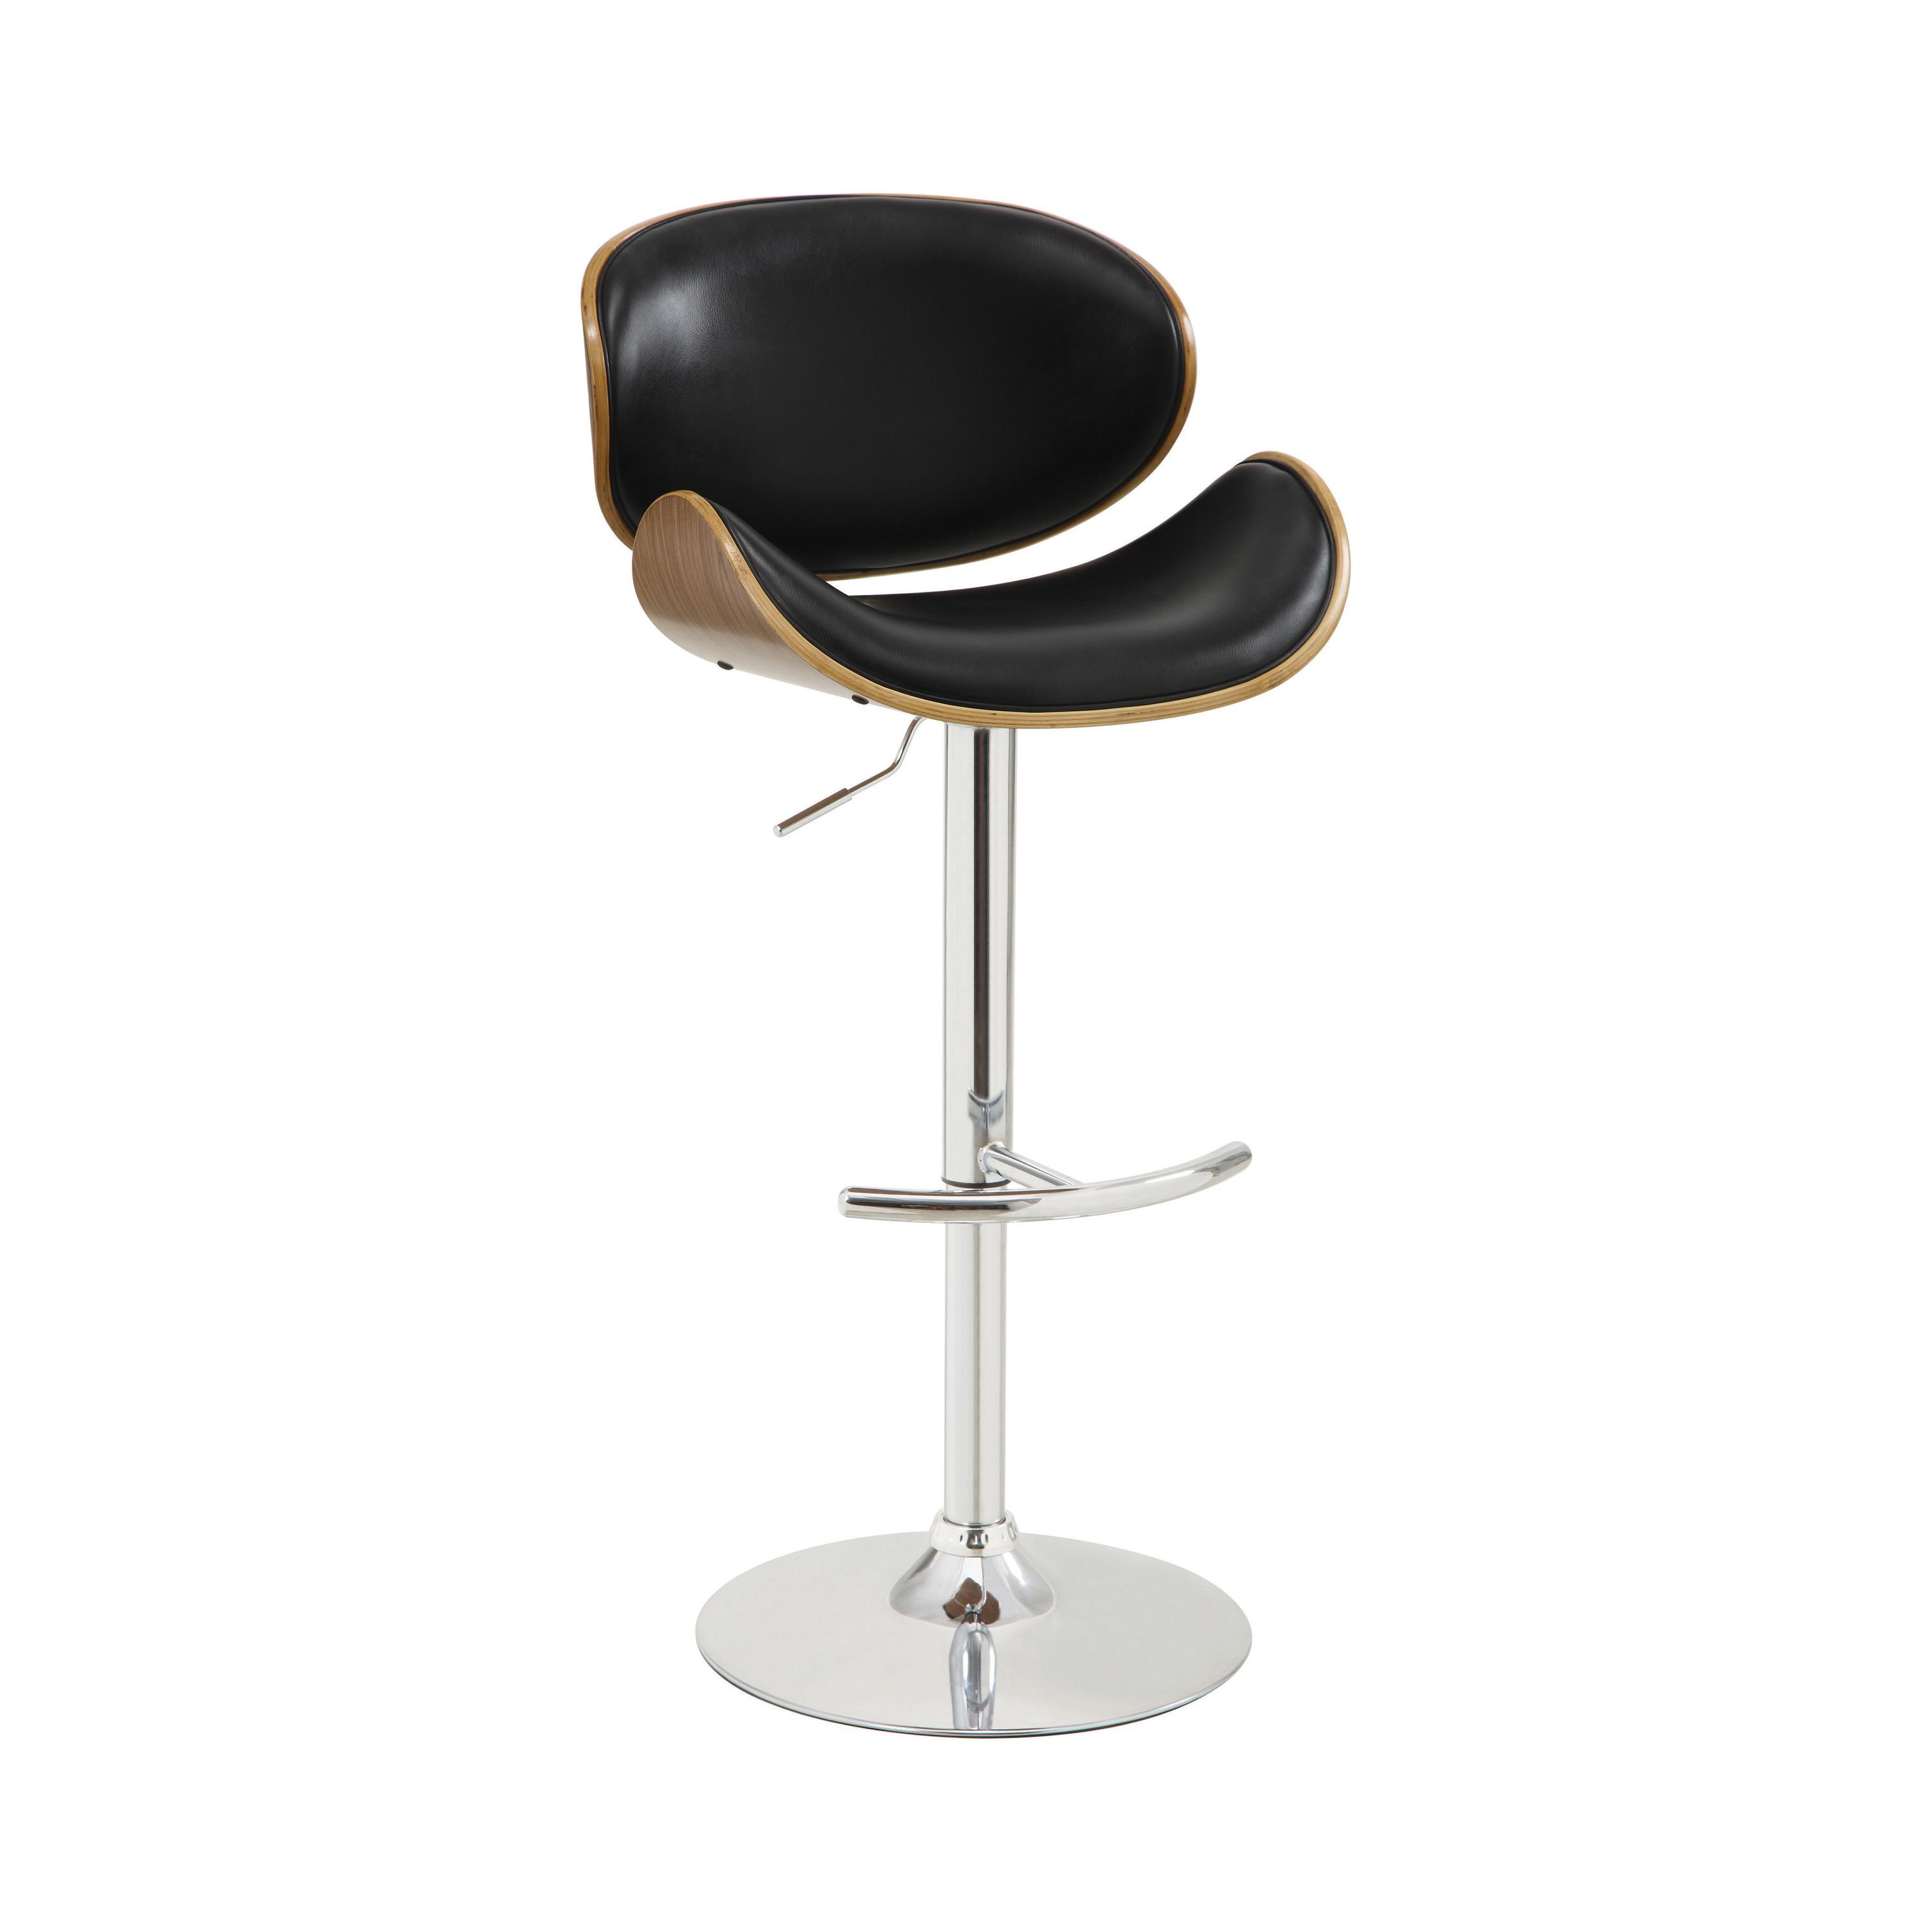 Contemporary Bar Stool 130504 130504 in Black Leatherette